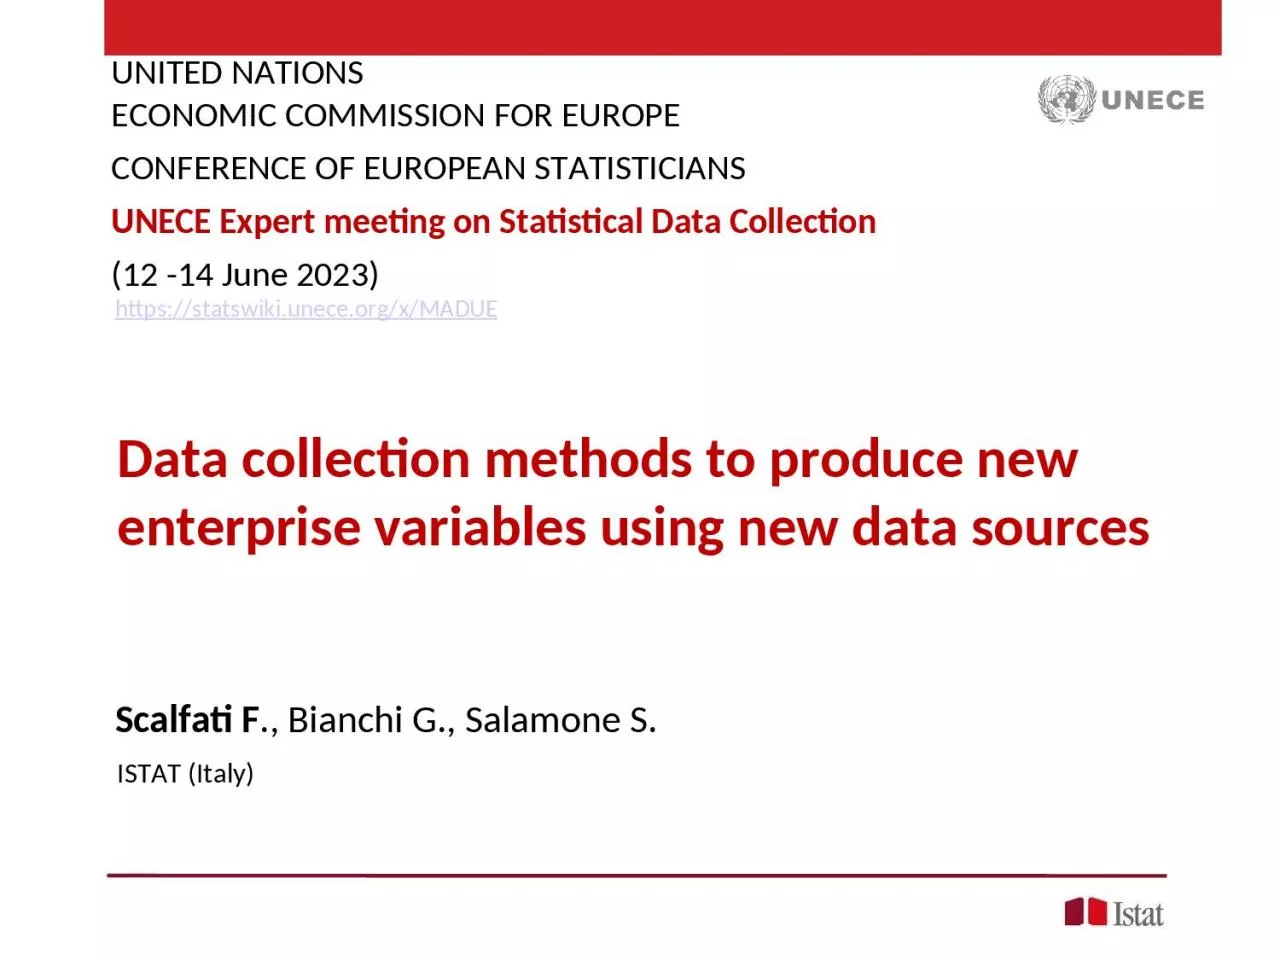 Data collection methods to produce new enterprise variables using new data sources